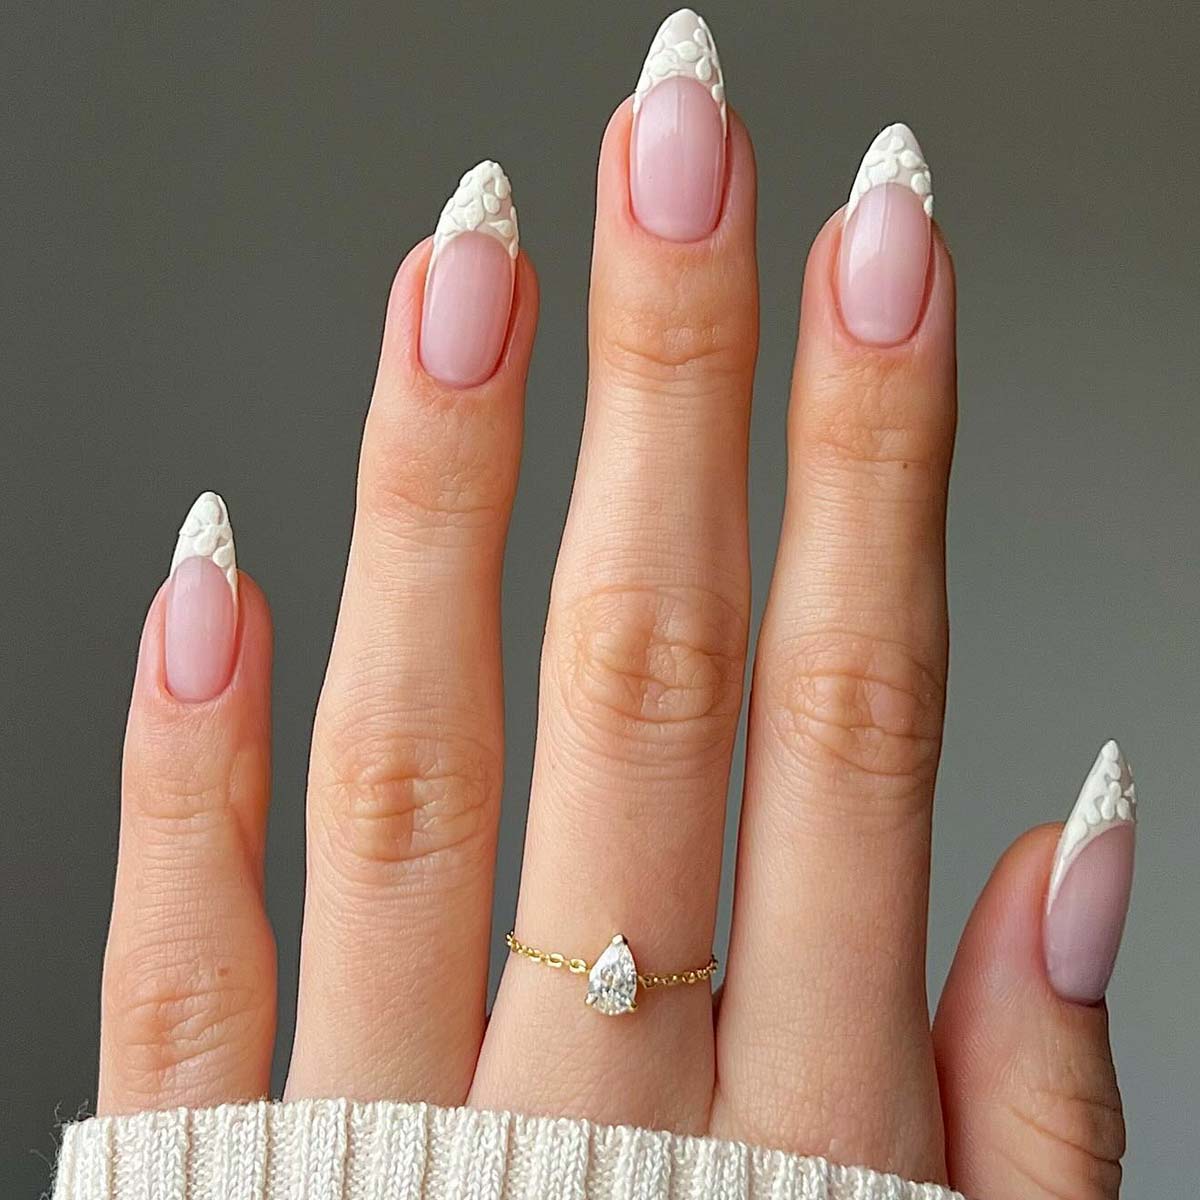 French manicure bianca natale